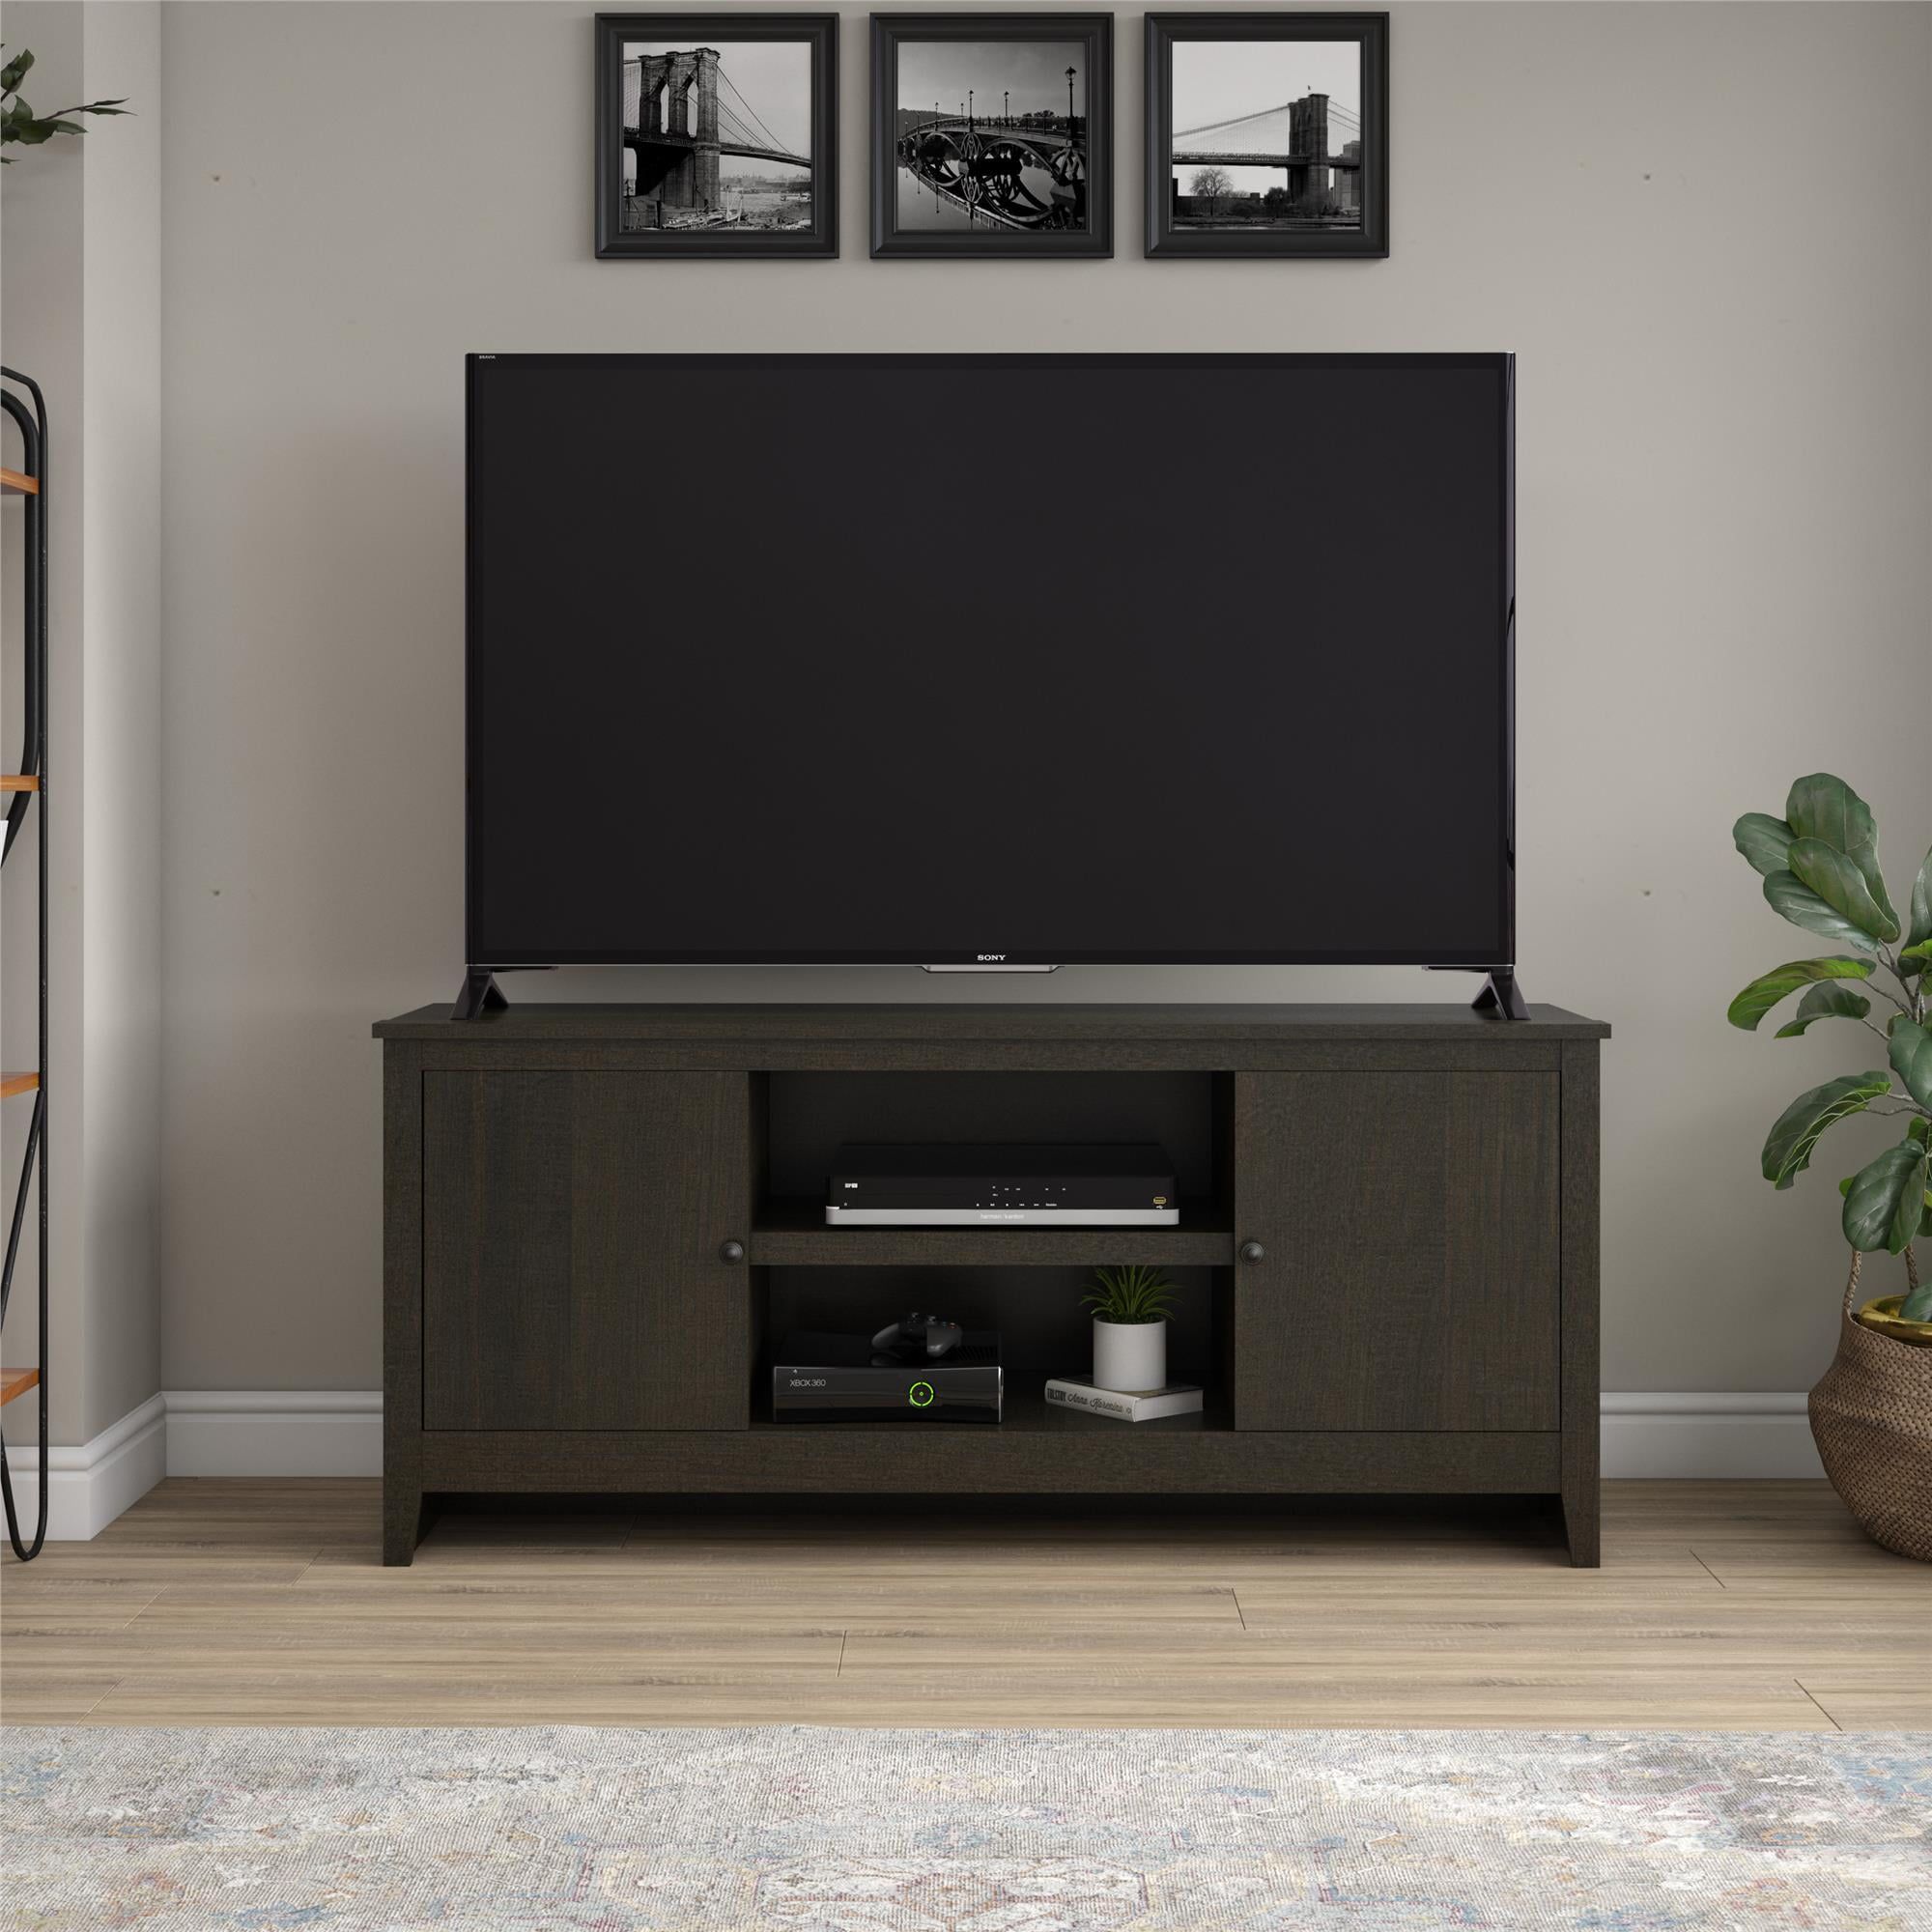 Mainstays 65" Television Stand Espresso – Walmart Inside Cafe Tv Stands With Storage (Gallery 3 of 20)